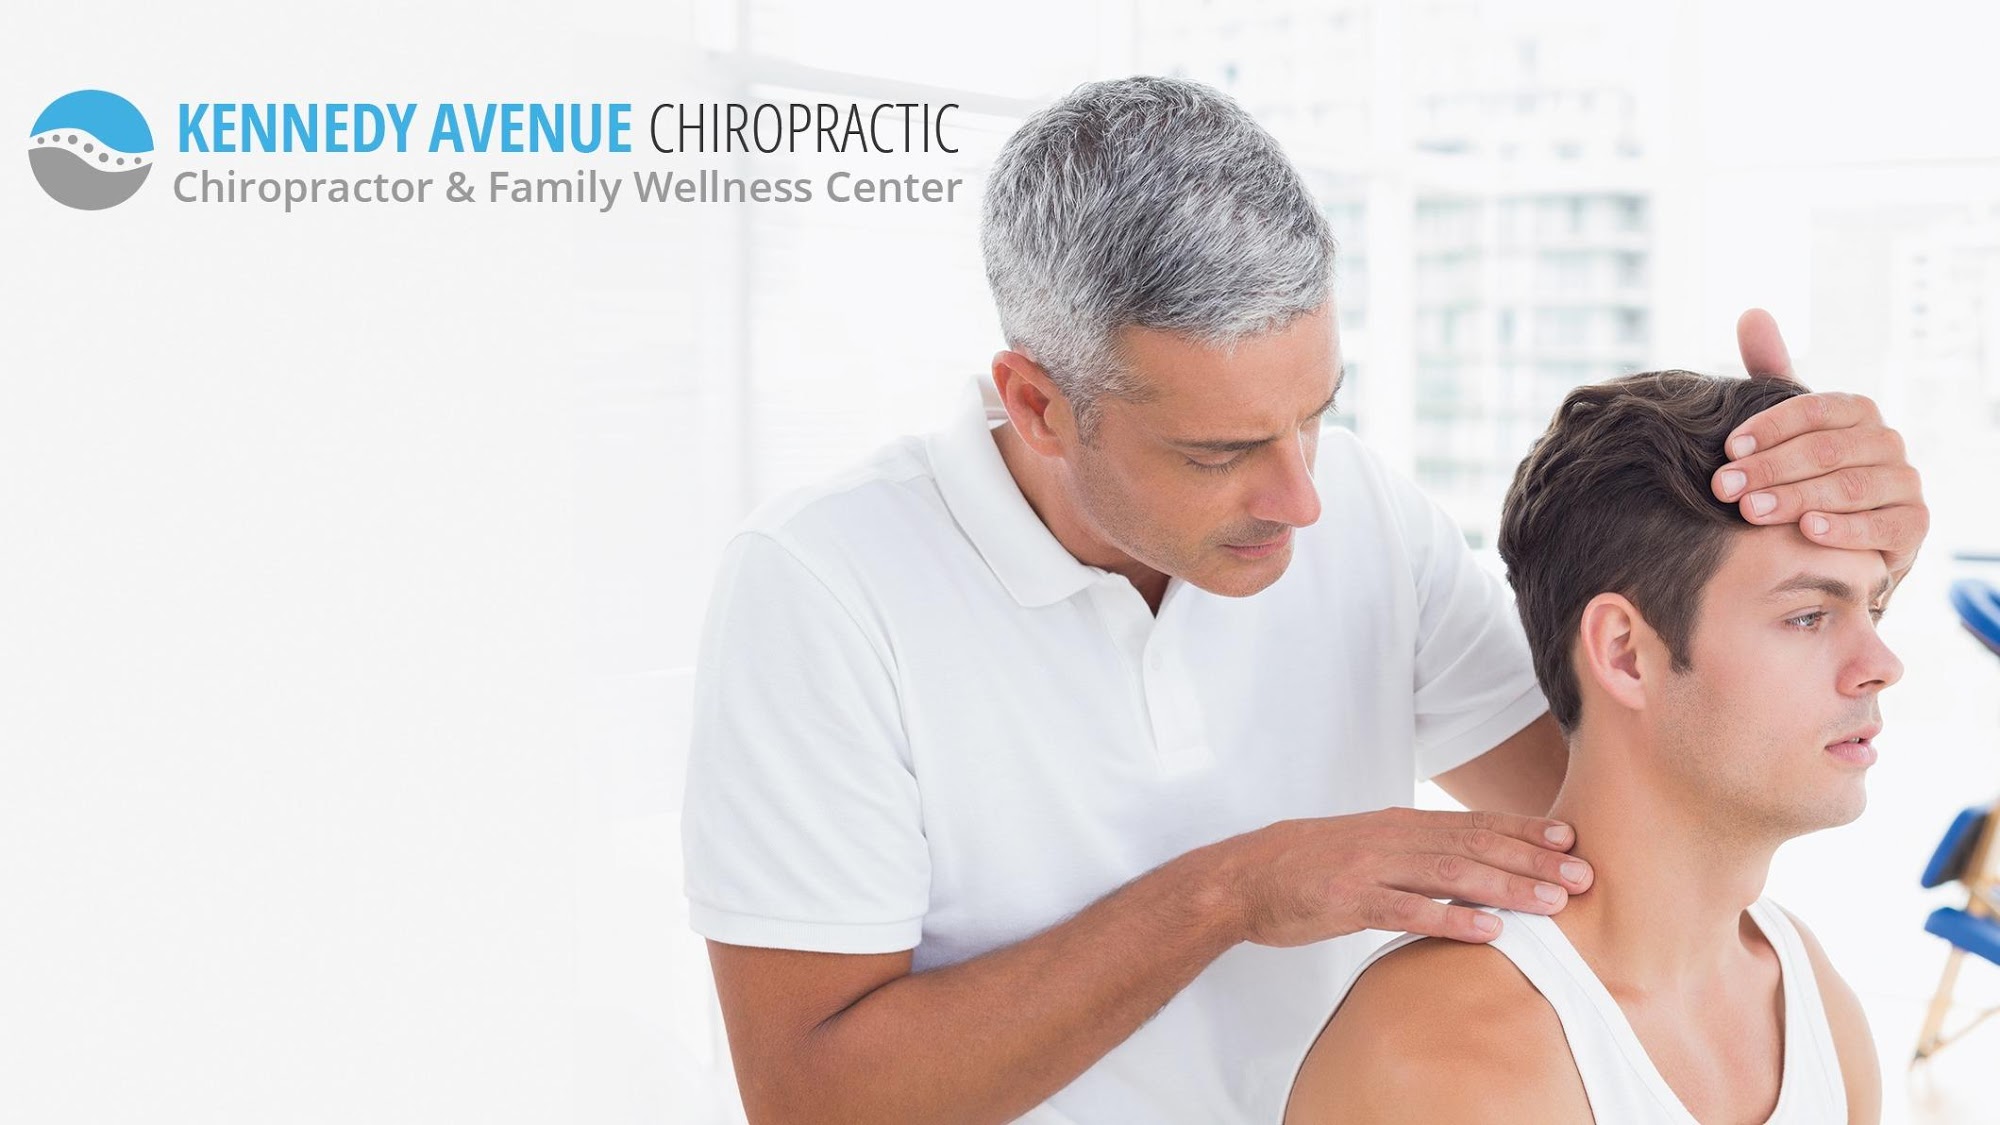 Kennedy Avenue Chiropractic